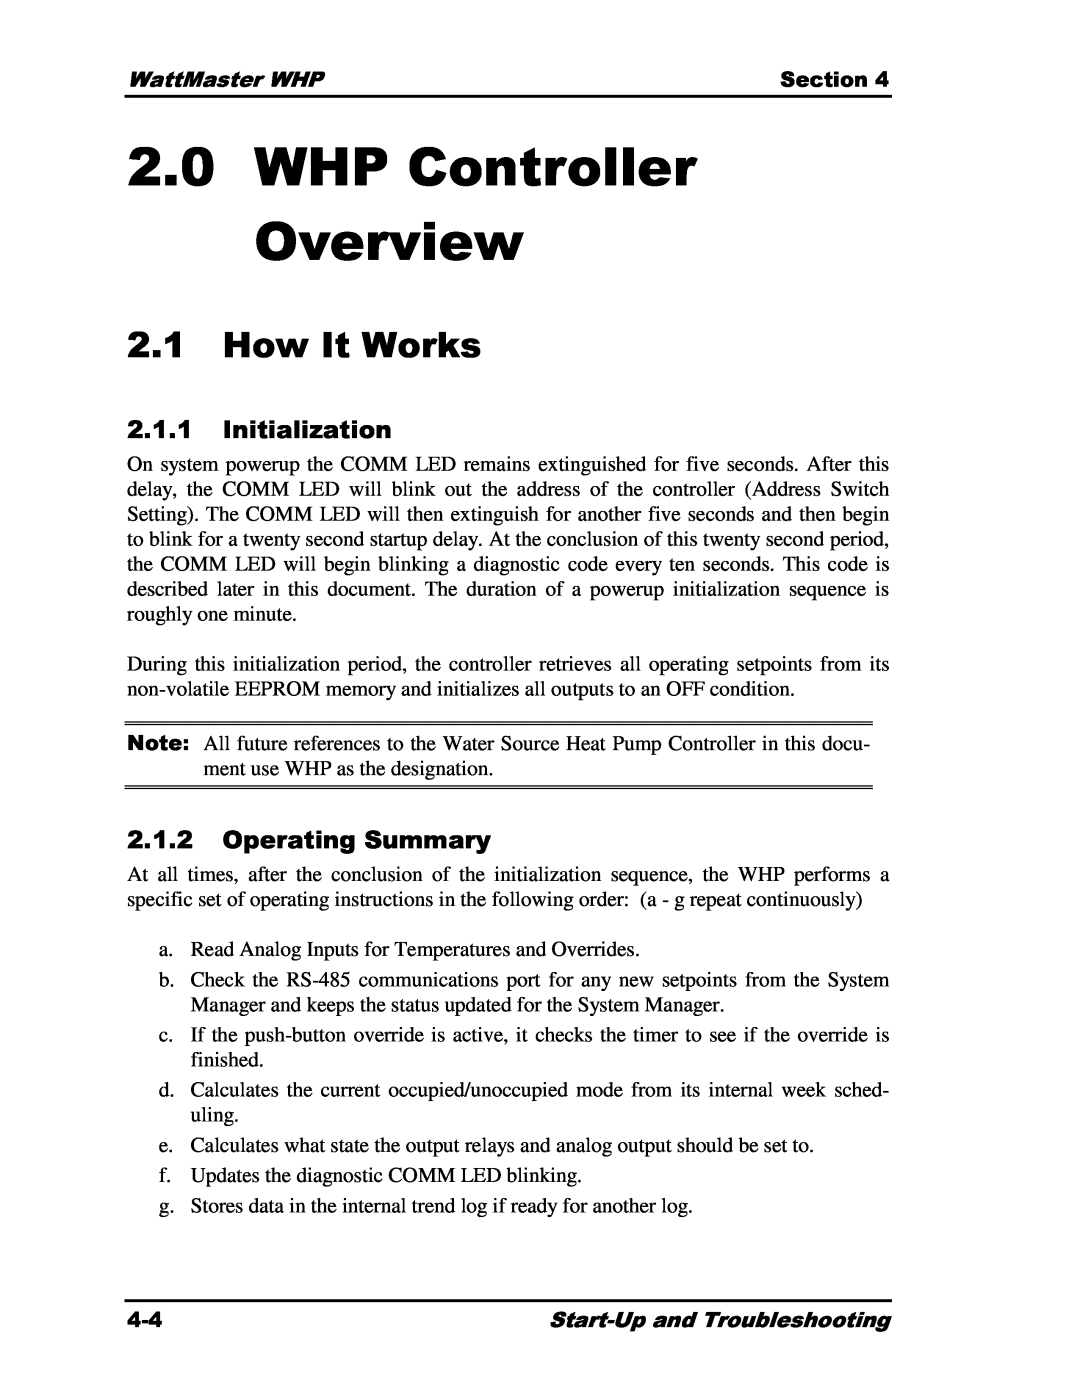 Heat Controller Water Source Heat Pump manual 2.0WHP Controller Overview, 2.1How It Works 